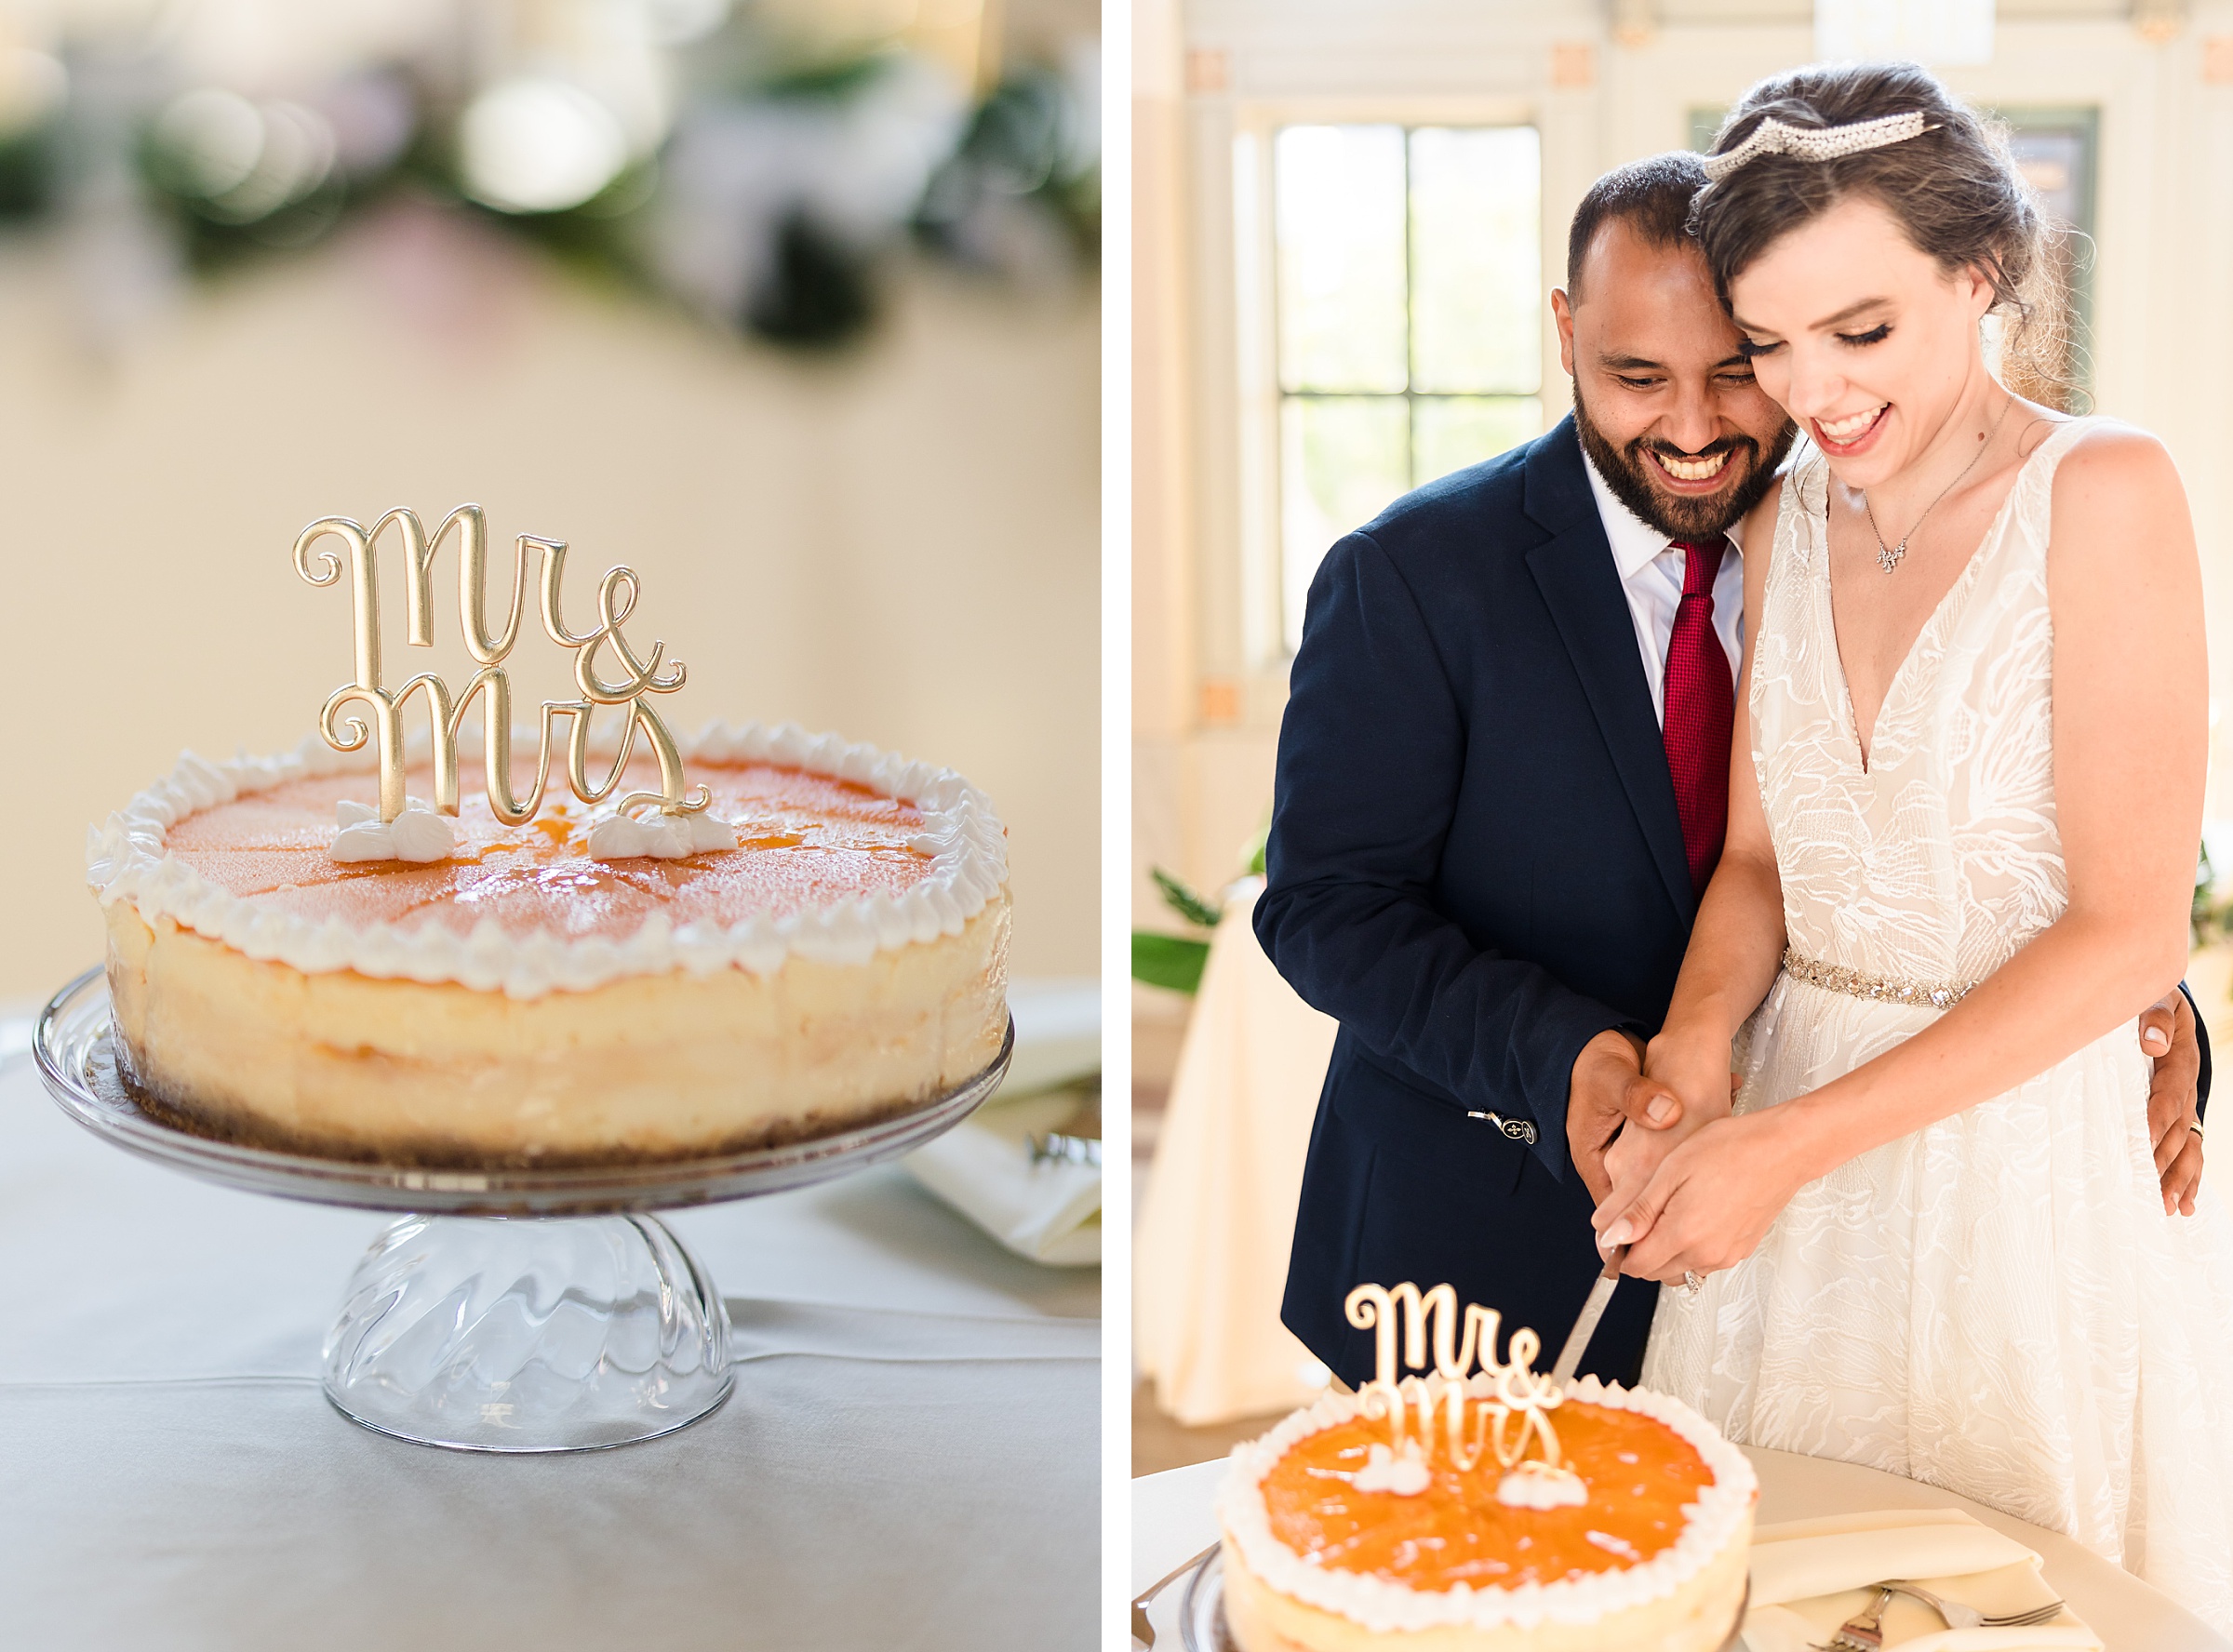 Bride and groom cut their wedding cheesecake during their wedding at the Union Station in Joliet, Illinois.